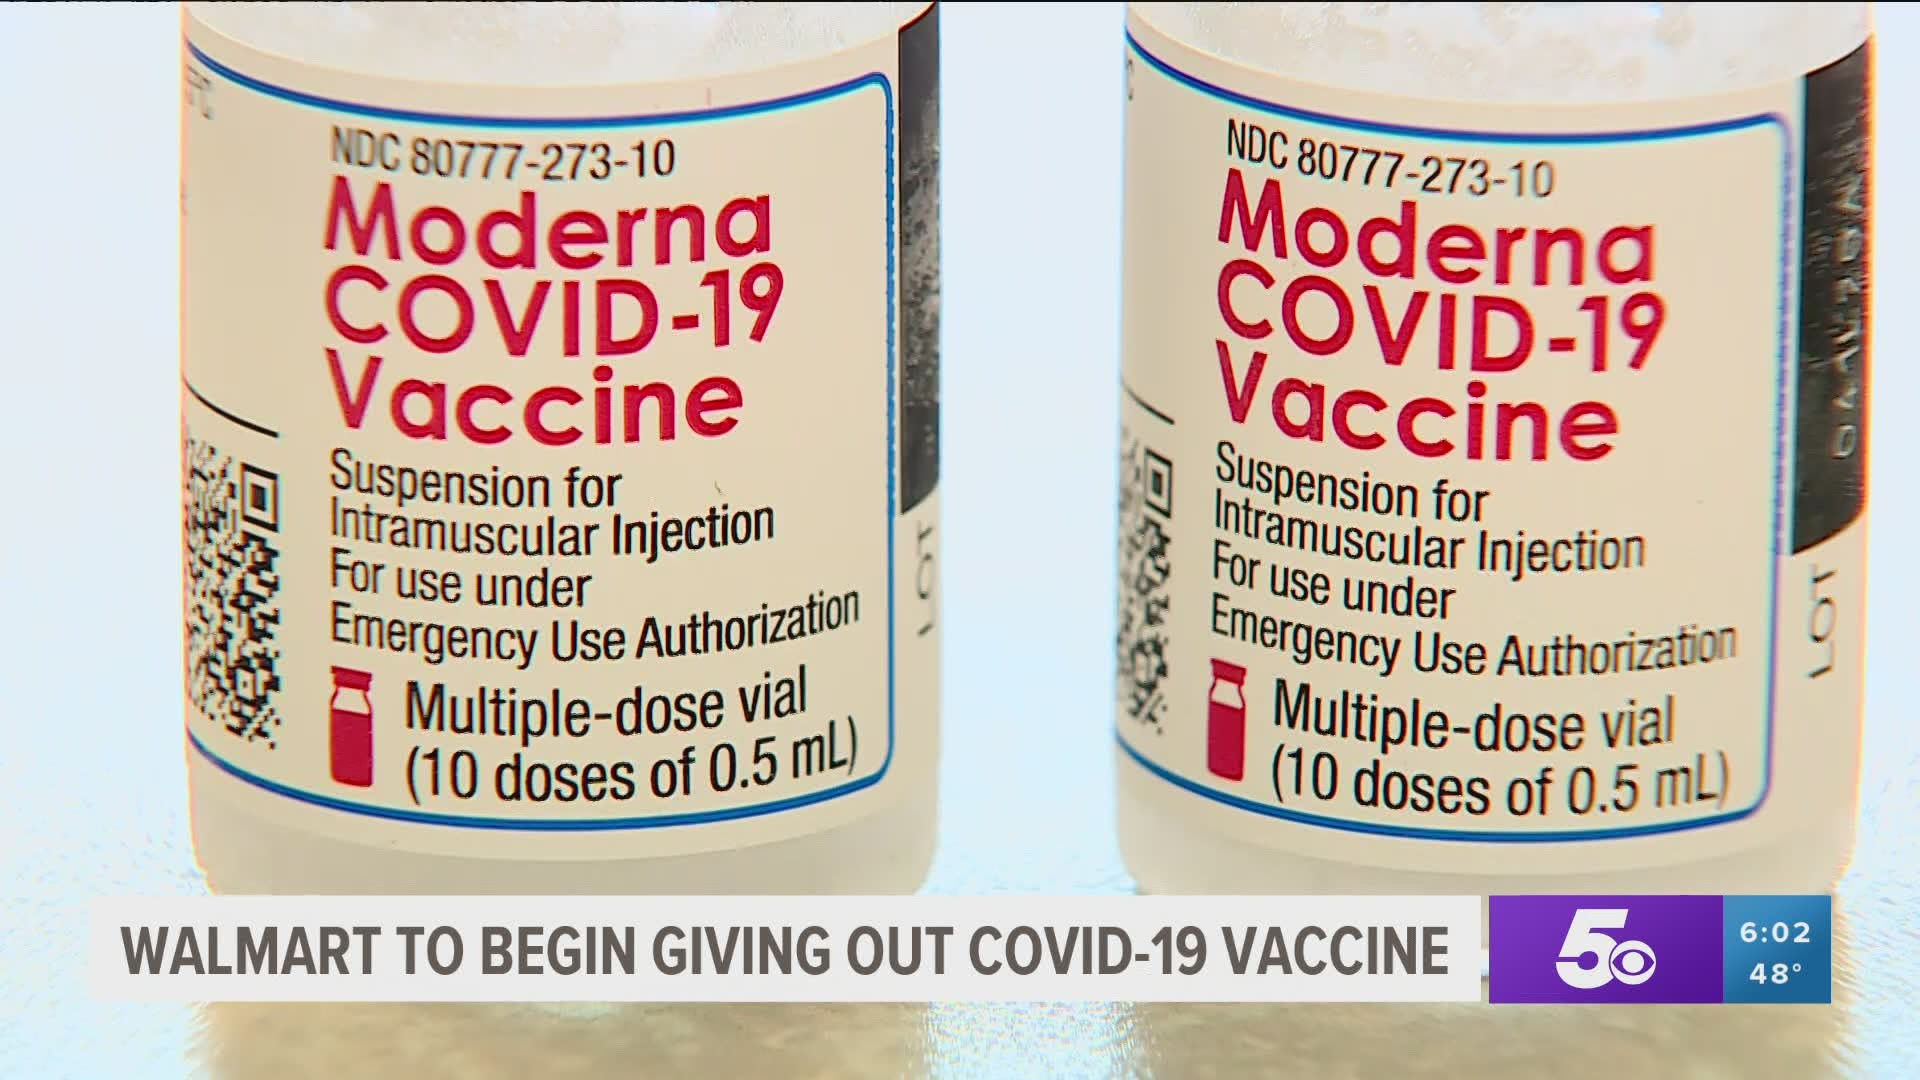 The state does not have a contract with Walgreens or CVS, which received more doses than needed with their federal contract to vaccinate long-term care facilities.